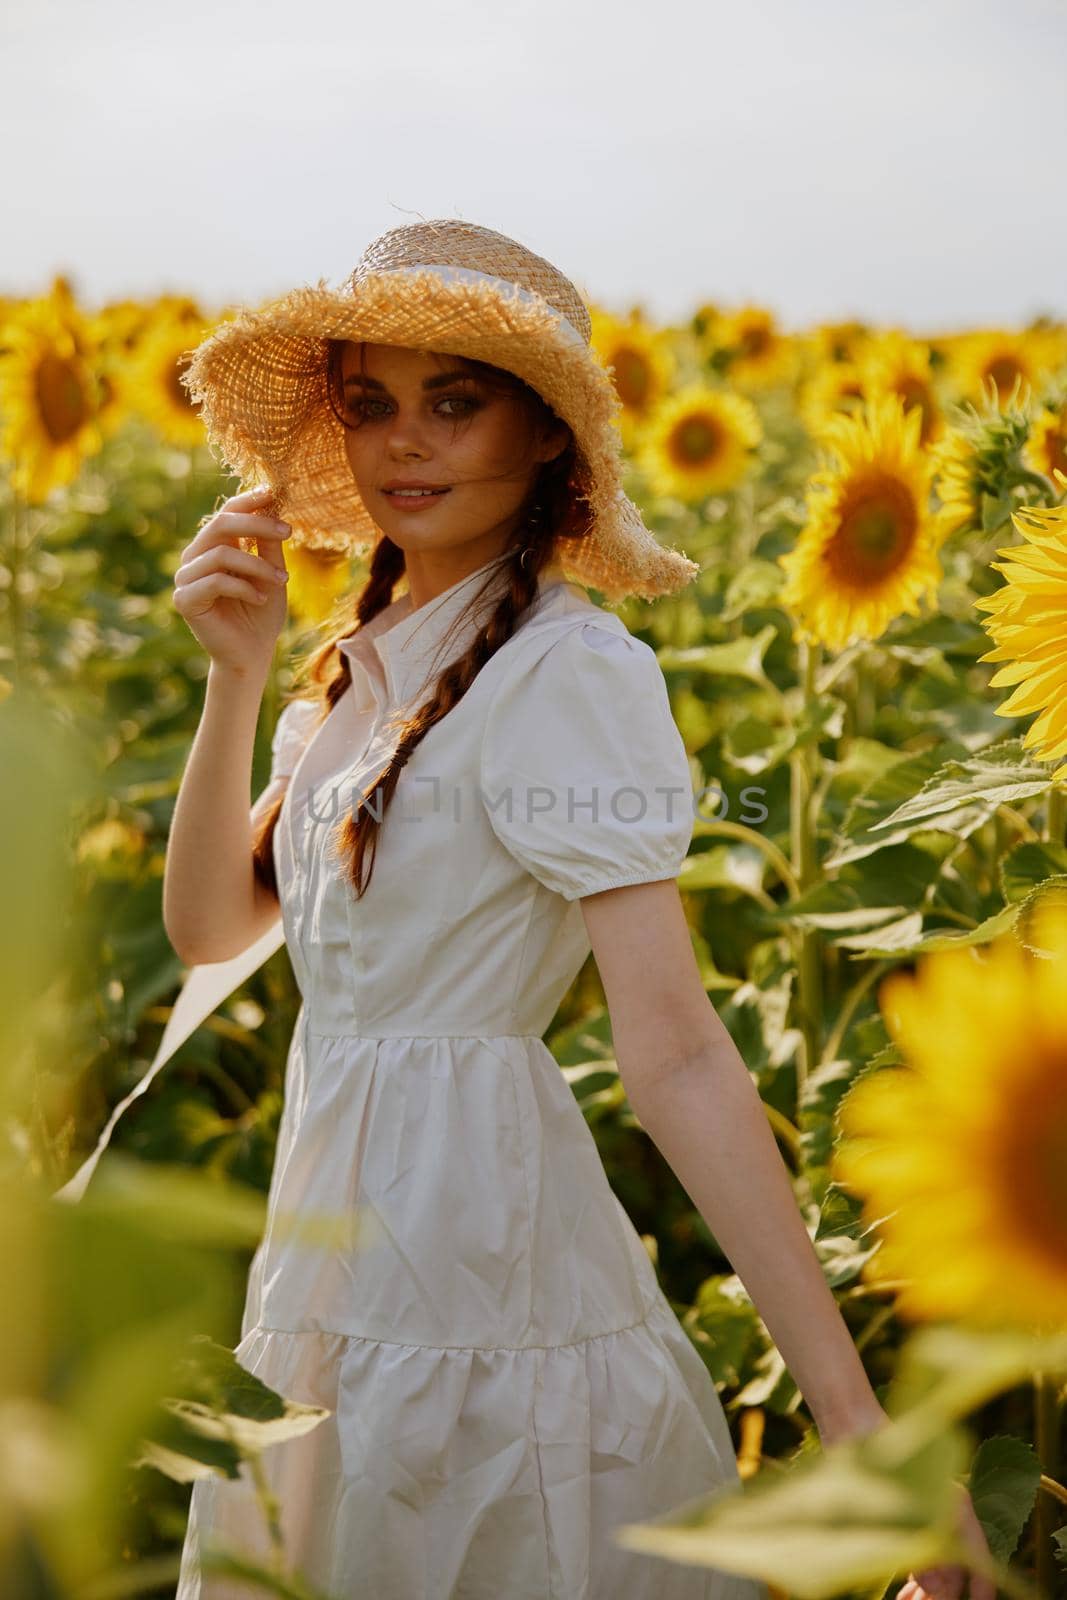 woman with pigtails looking in the sunflower field Summer time. High quality photo